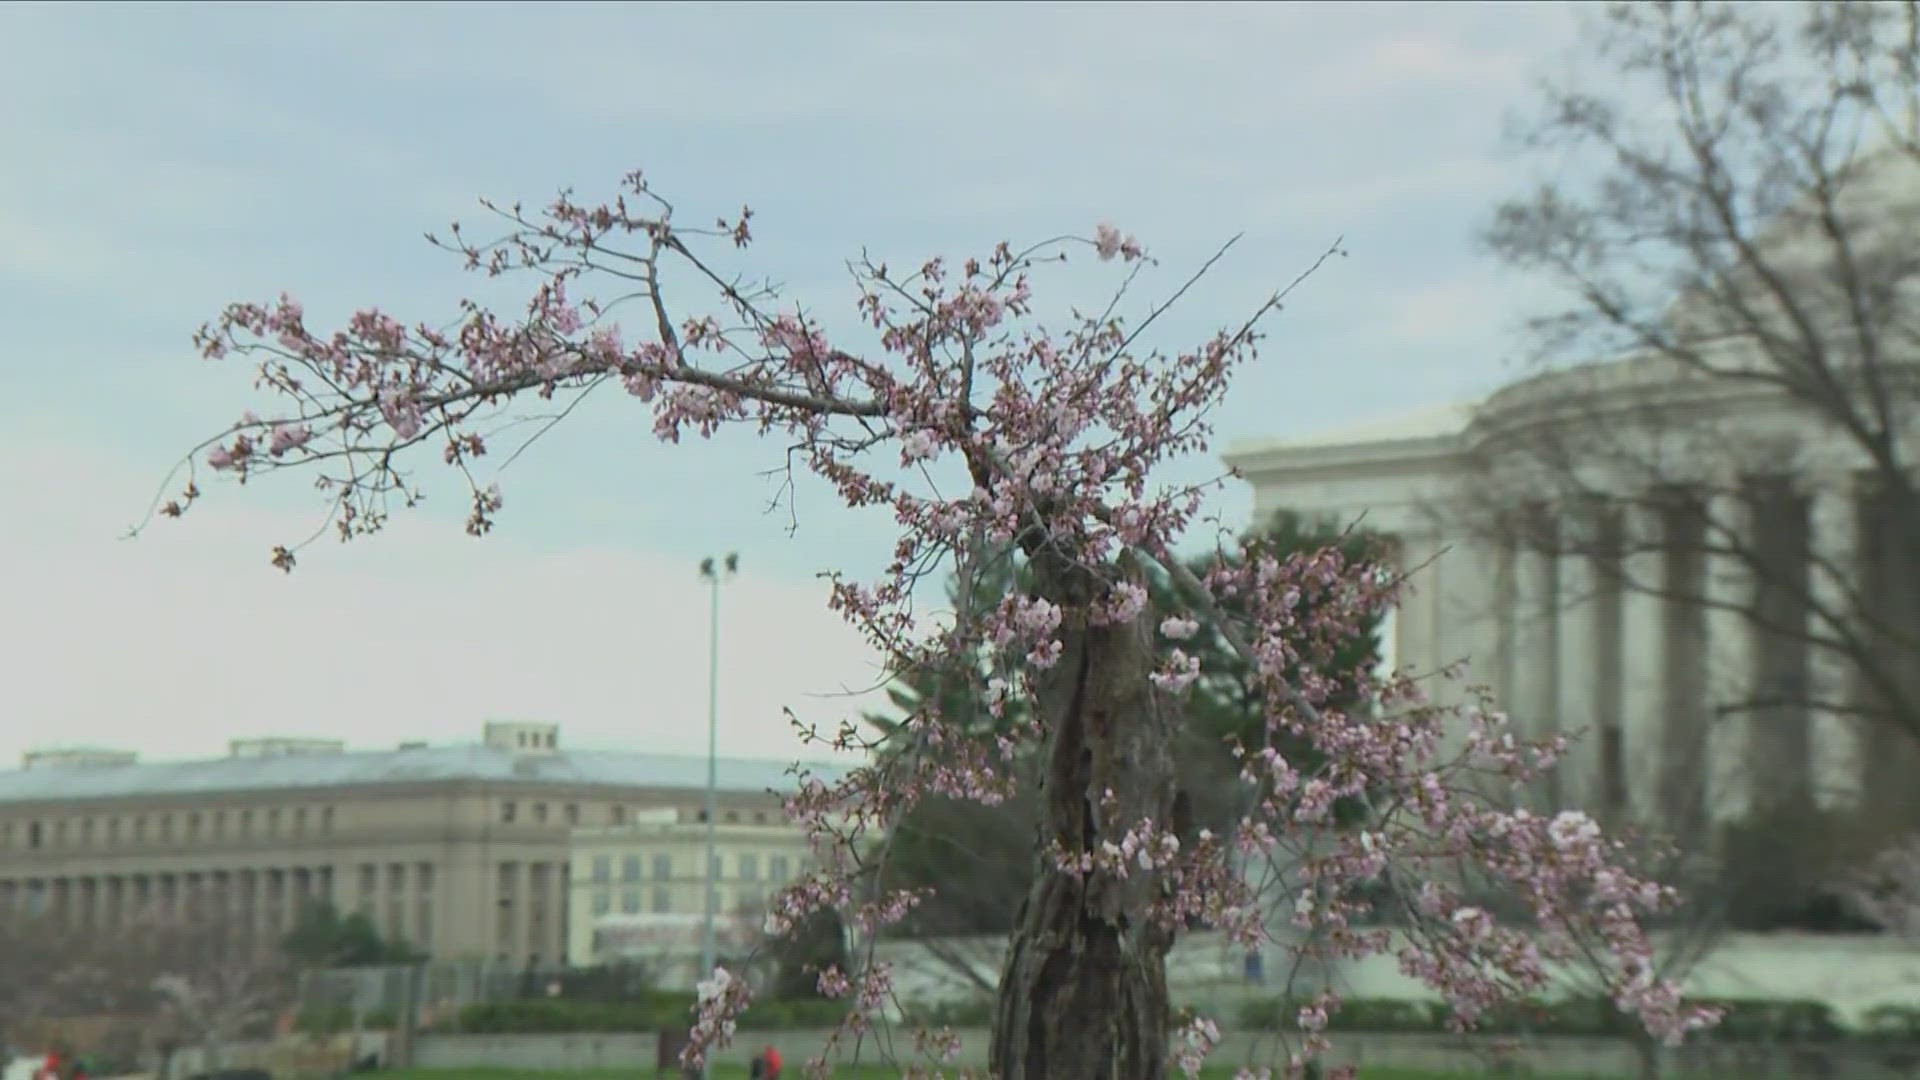 The National Arboretum plans to propagate clippings of Stumpy and re-plant them at the National Mall after a seawall reconstruction project is completed.